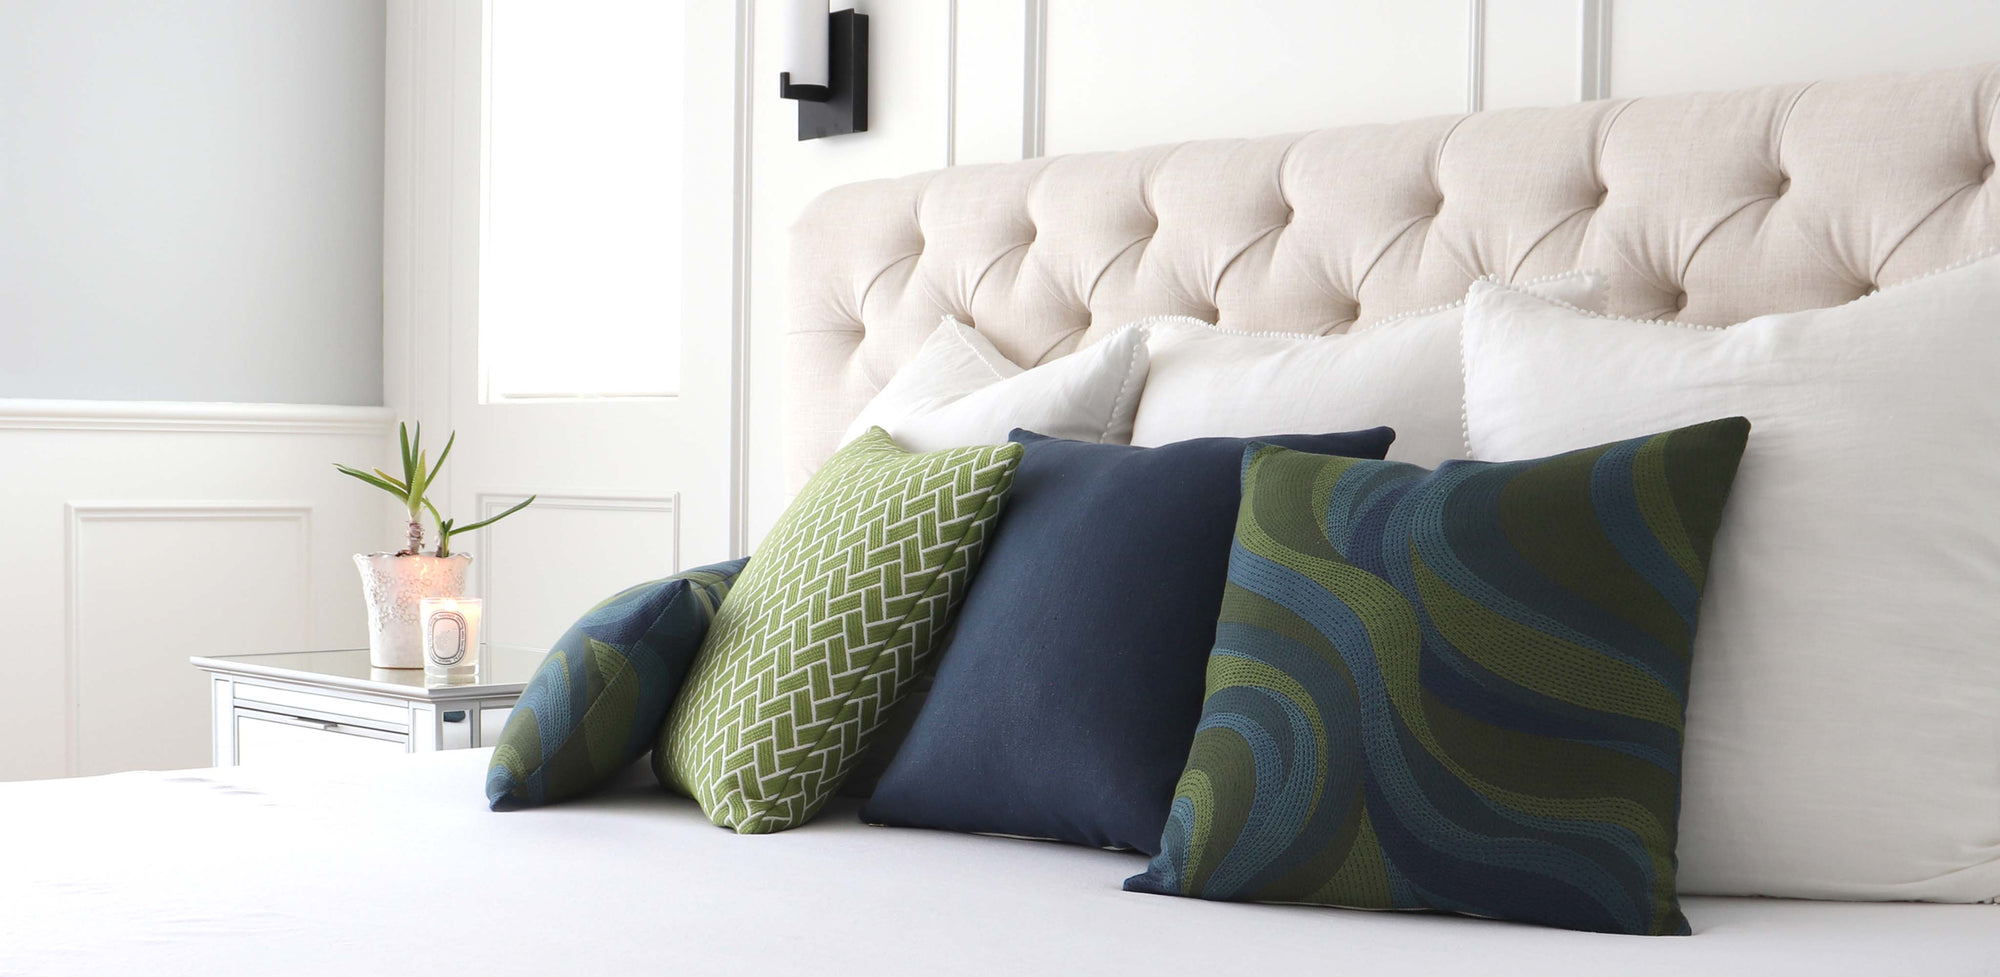 Chloe and Olive Designer Handcrafted Luxury Throw Pillow Covers